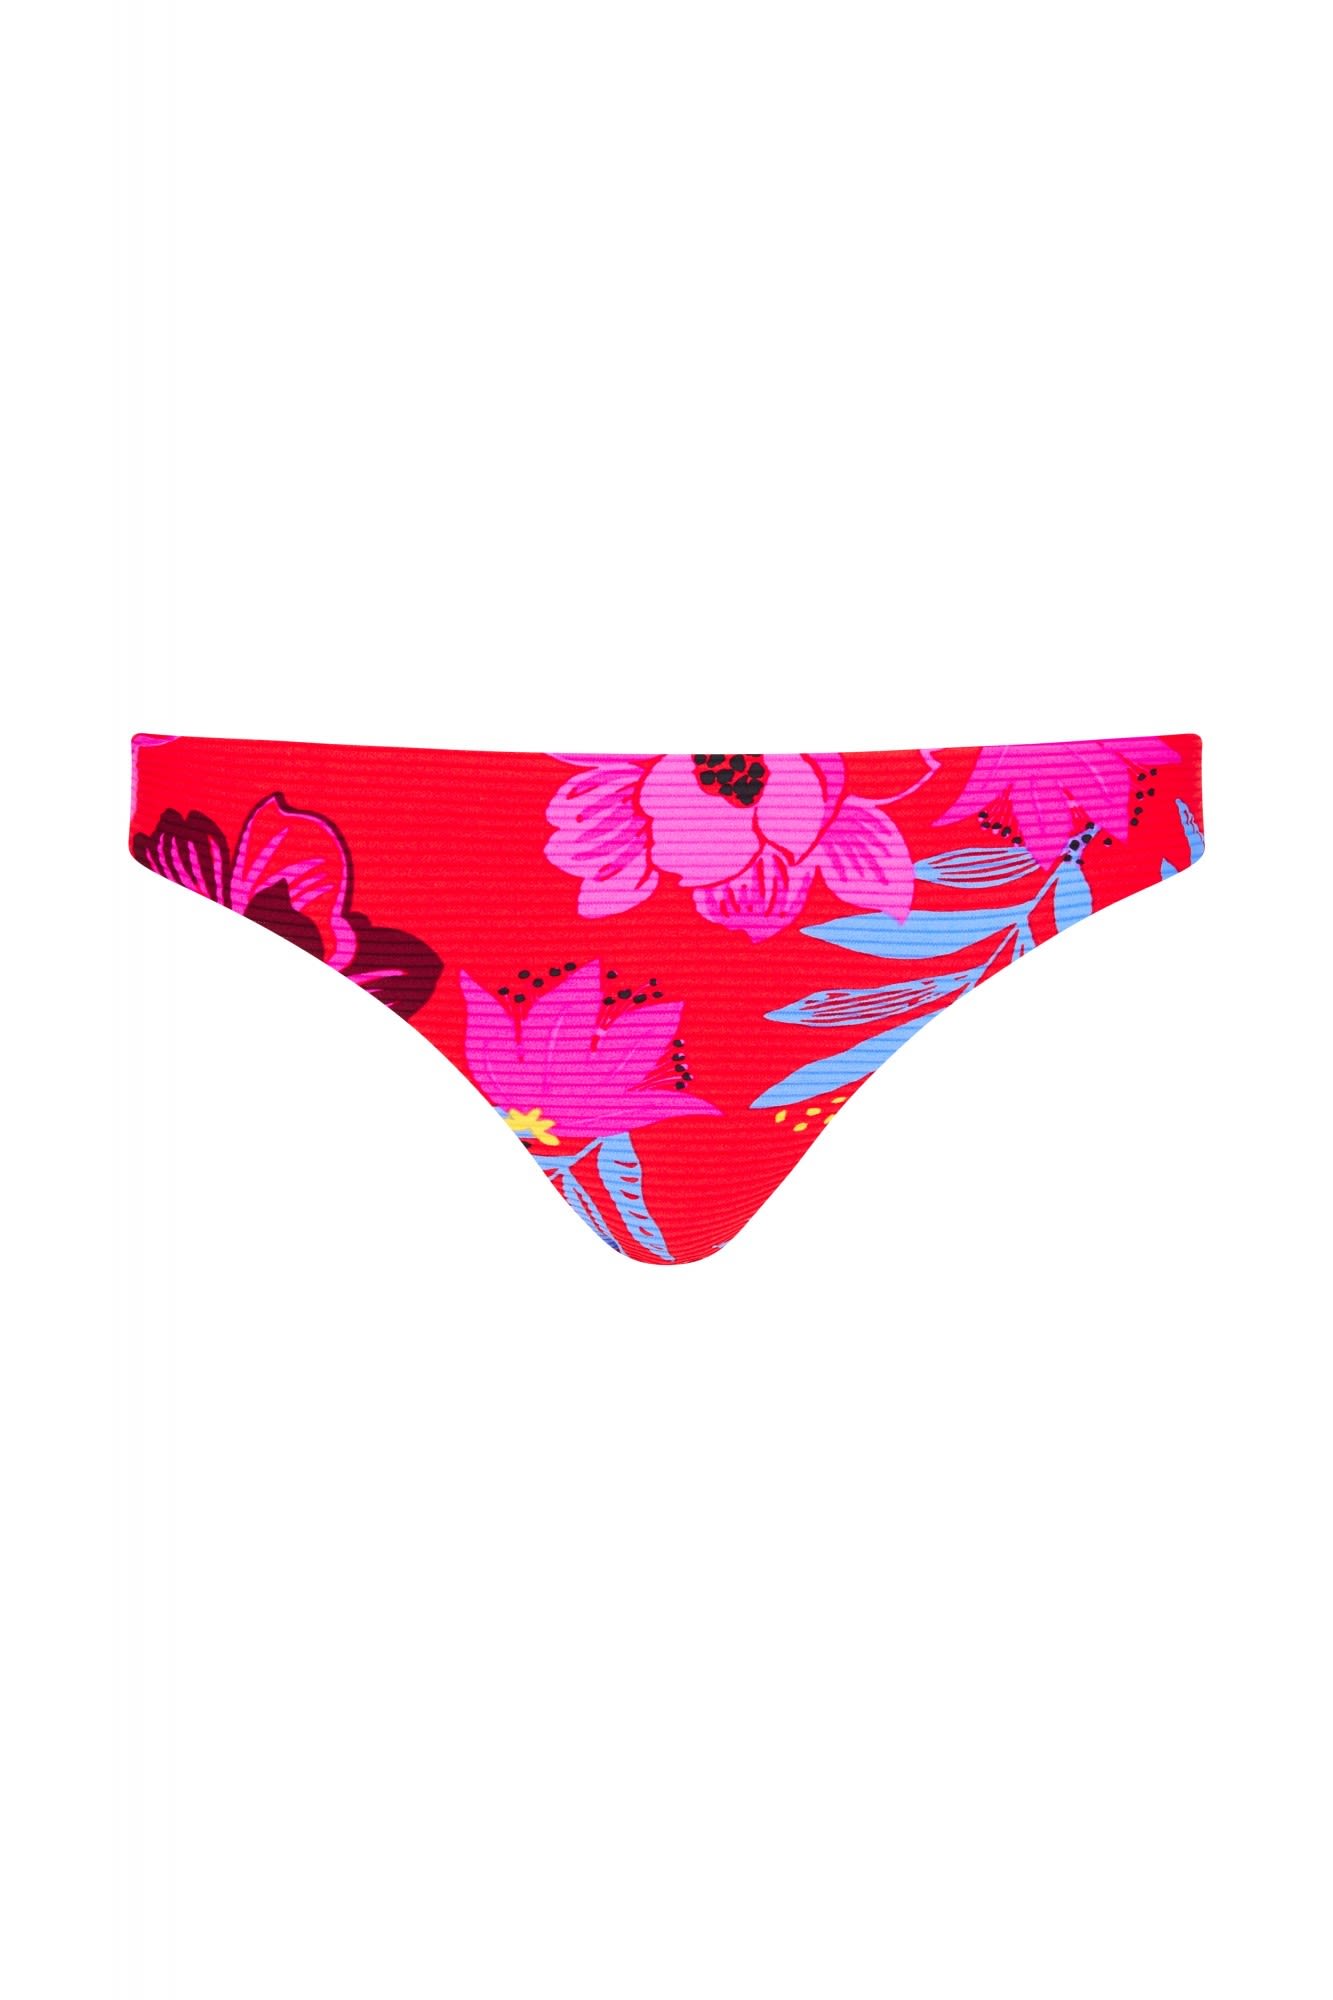 Seafolly ON Vacation Hipster Pink- Female Unterteile- Grsse AUS 14 - EU 40 - Farbe Chili